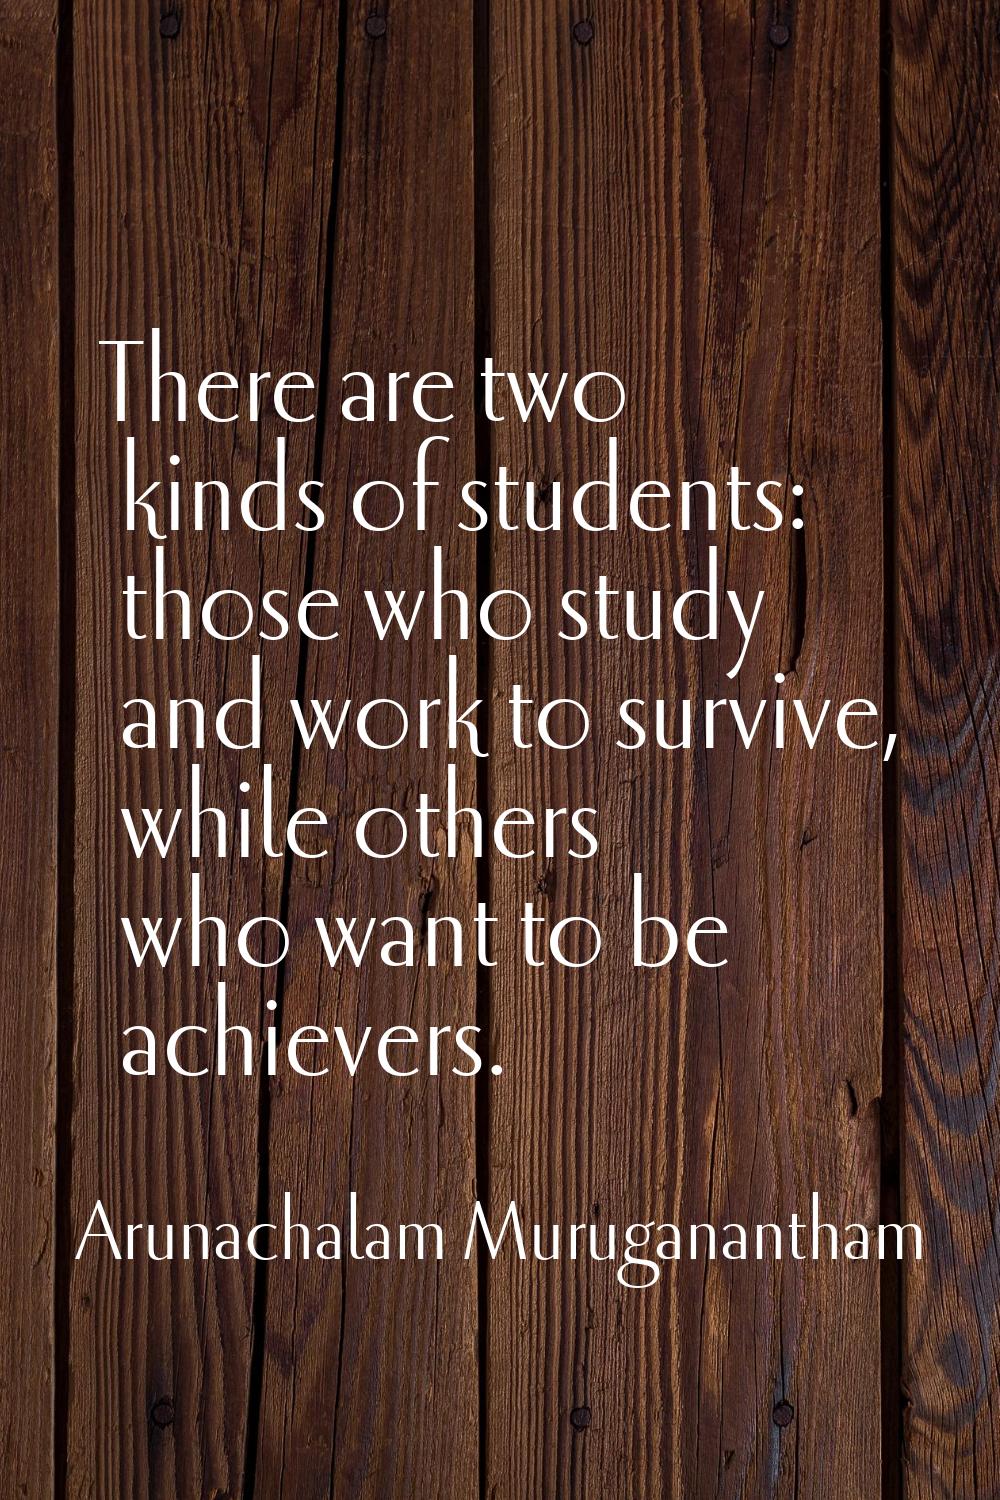 There are two kinds of students: those who study and work to survive, while others who want to be a